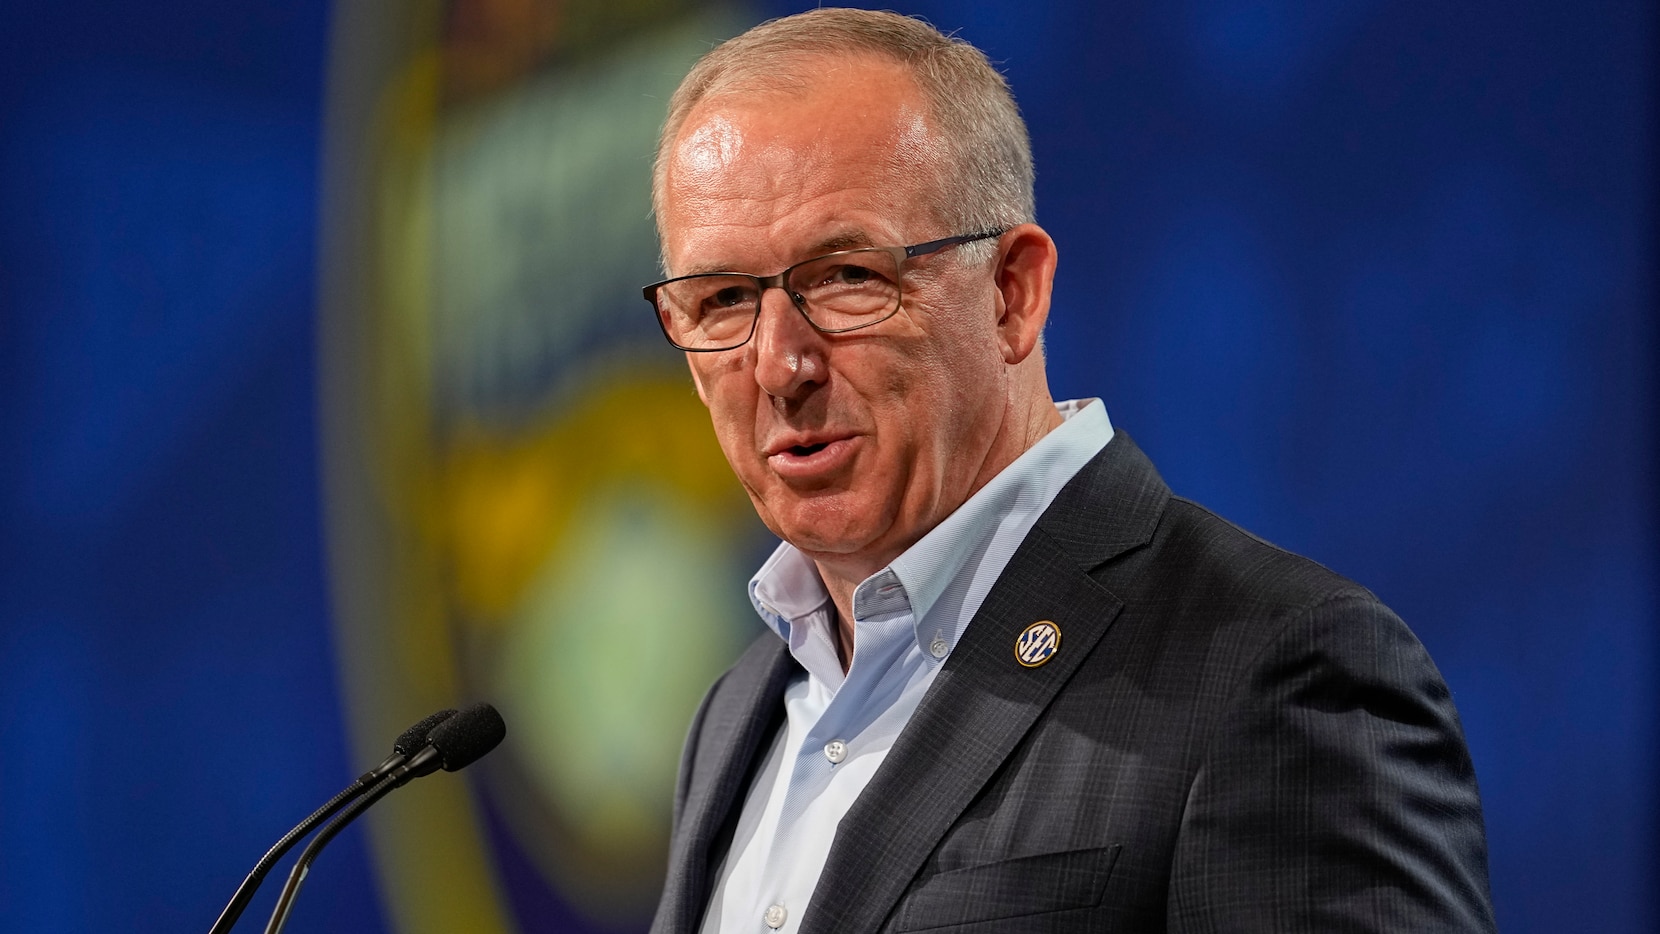 SEC Commissioner Greg Sankey speaks during the NCAA college football Southeastern Conference...